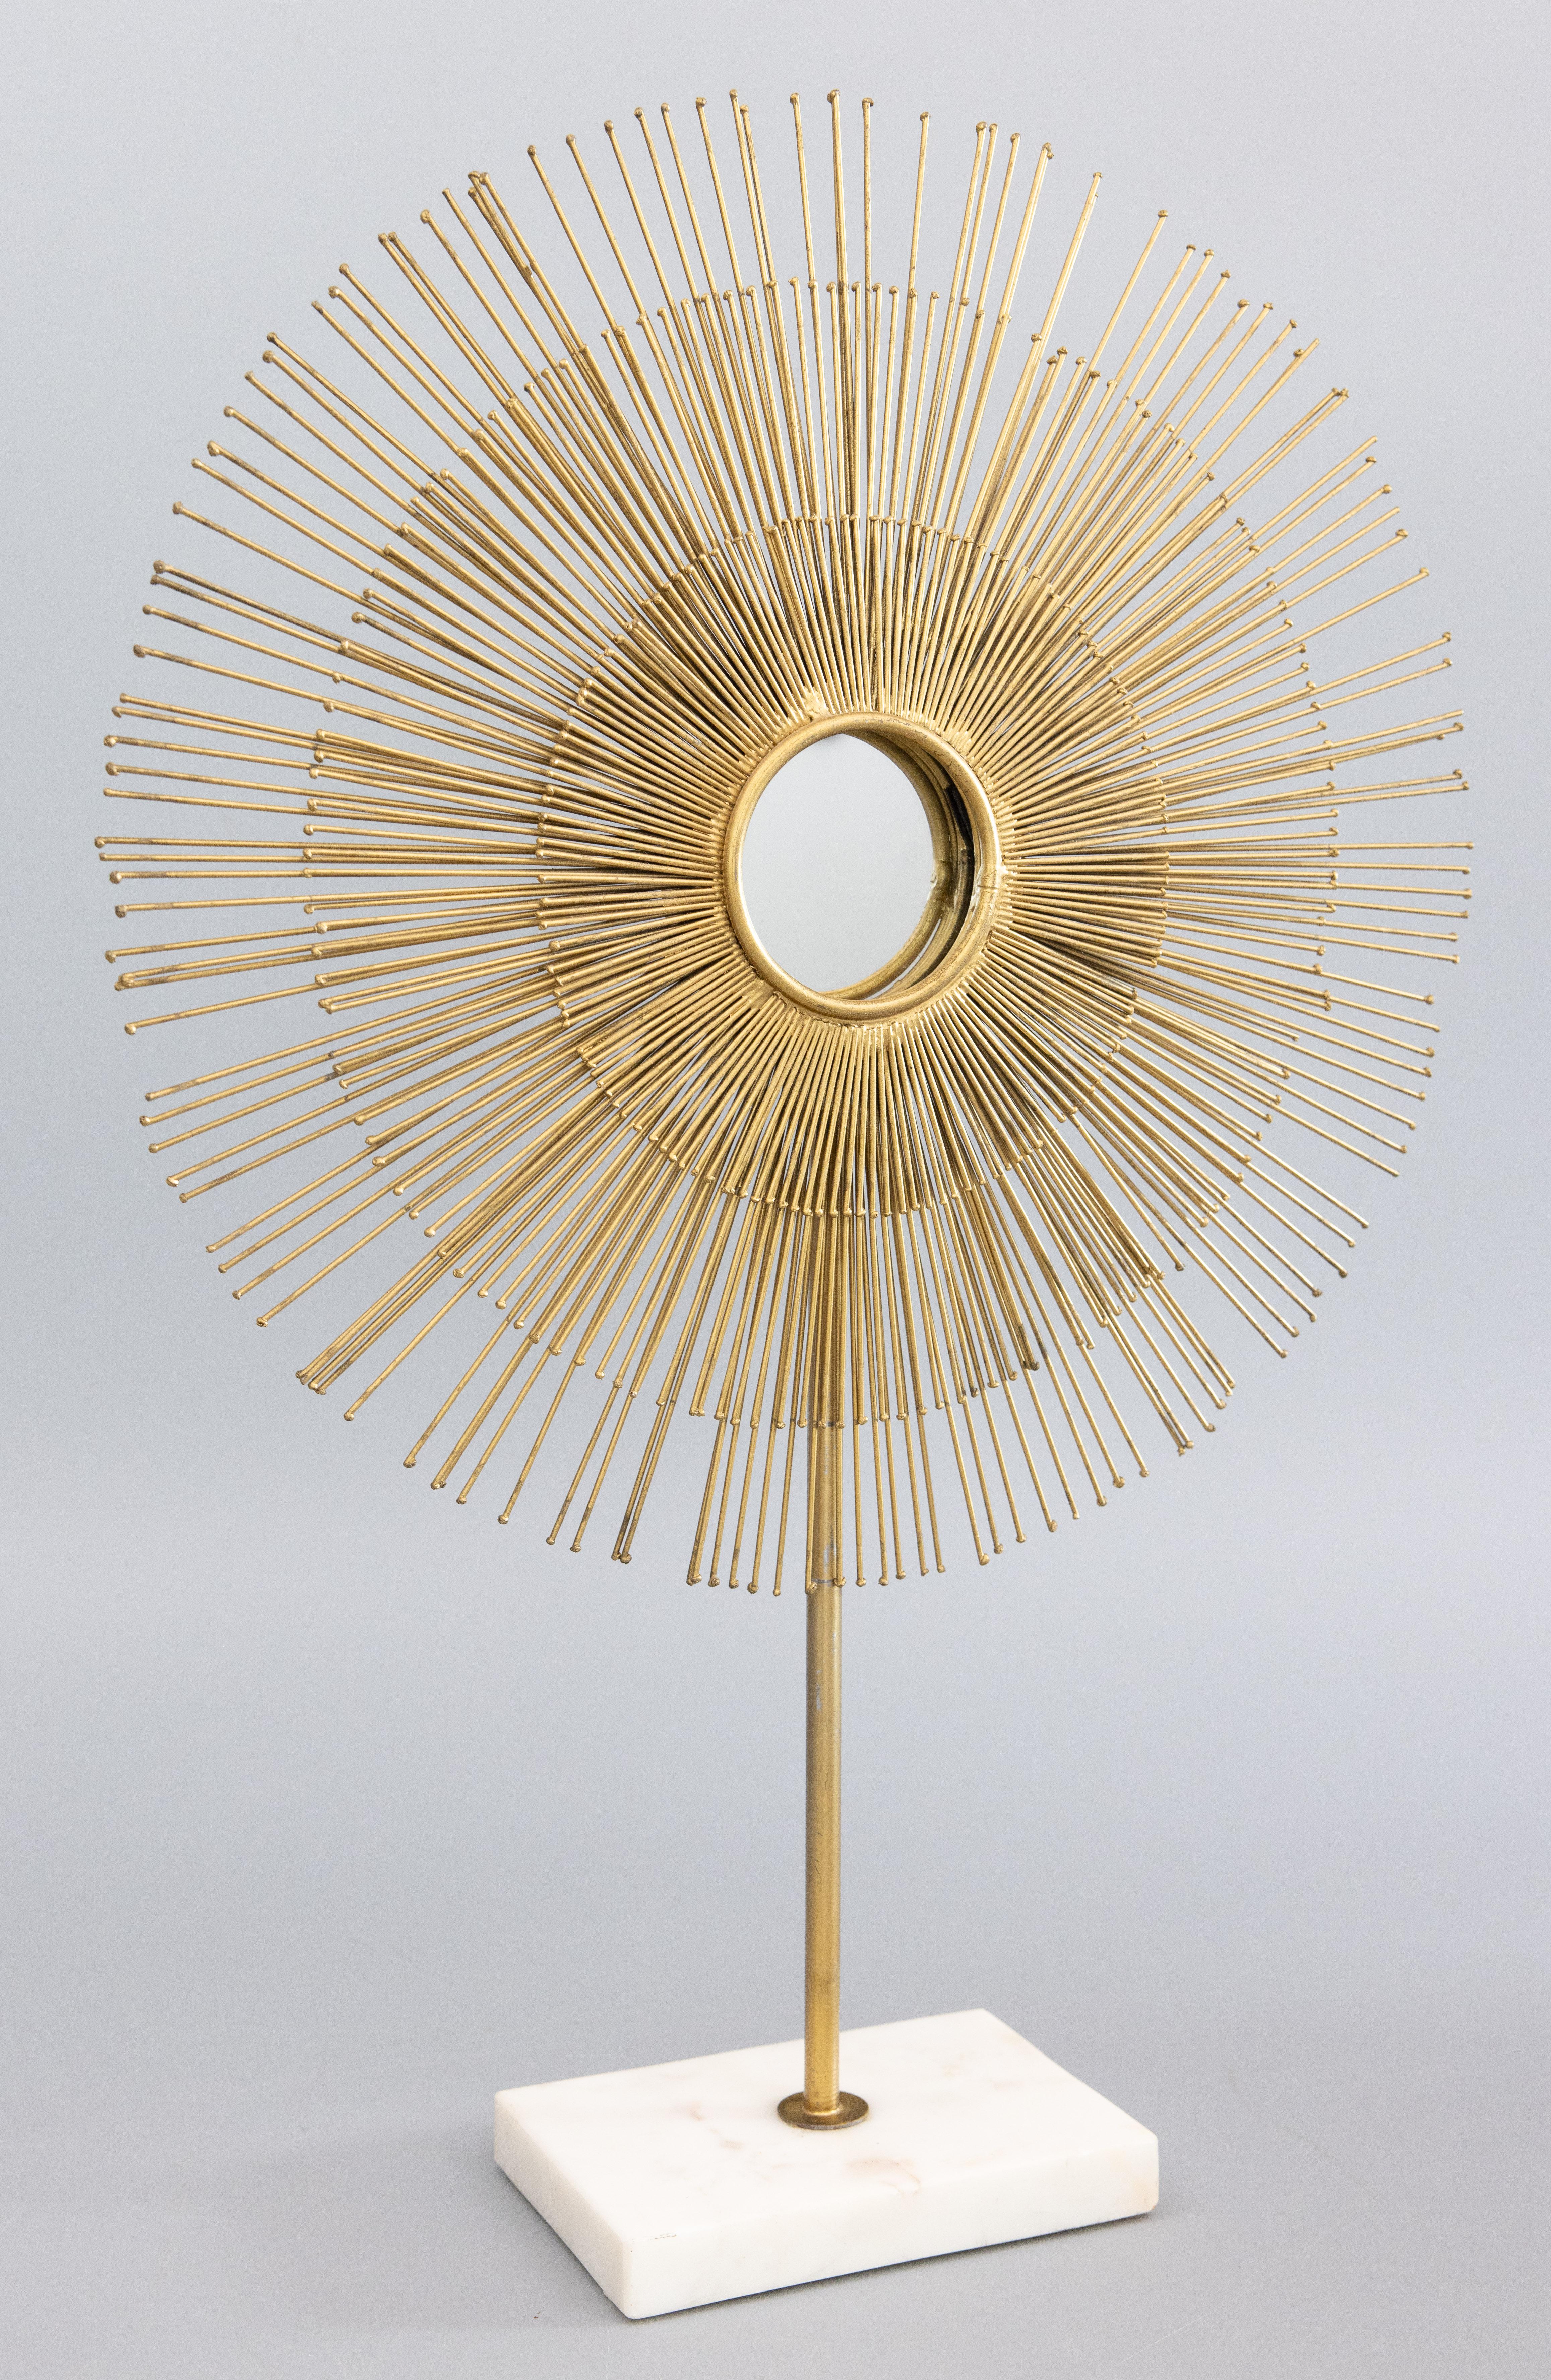 A fabulous vintage Mid-20th Century French gold gilt metal sunburst starburst tabletop mirror sculpture on a white marble base. A stylish accent piece for any room!

The diameter of the sunburst mirror is 15 inches and the sculpture is 21.5 inches